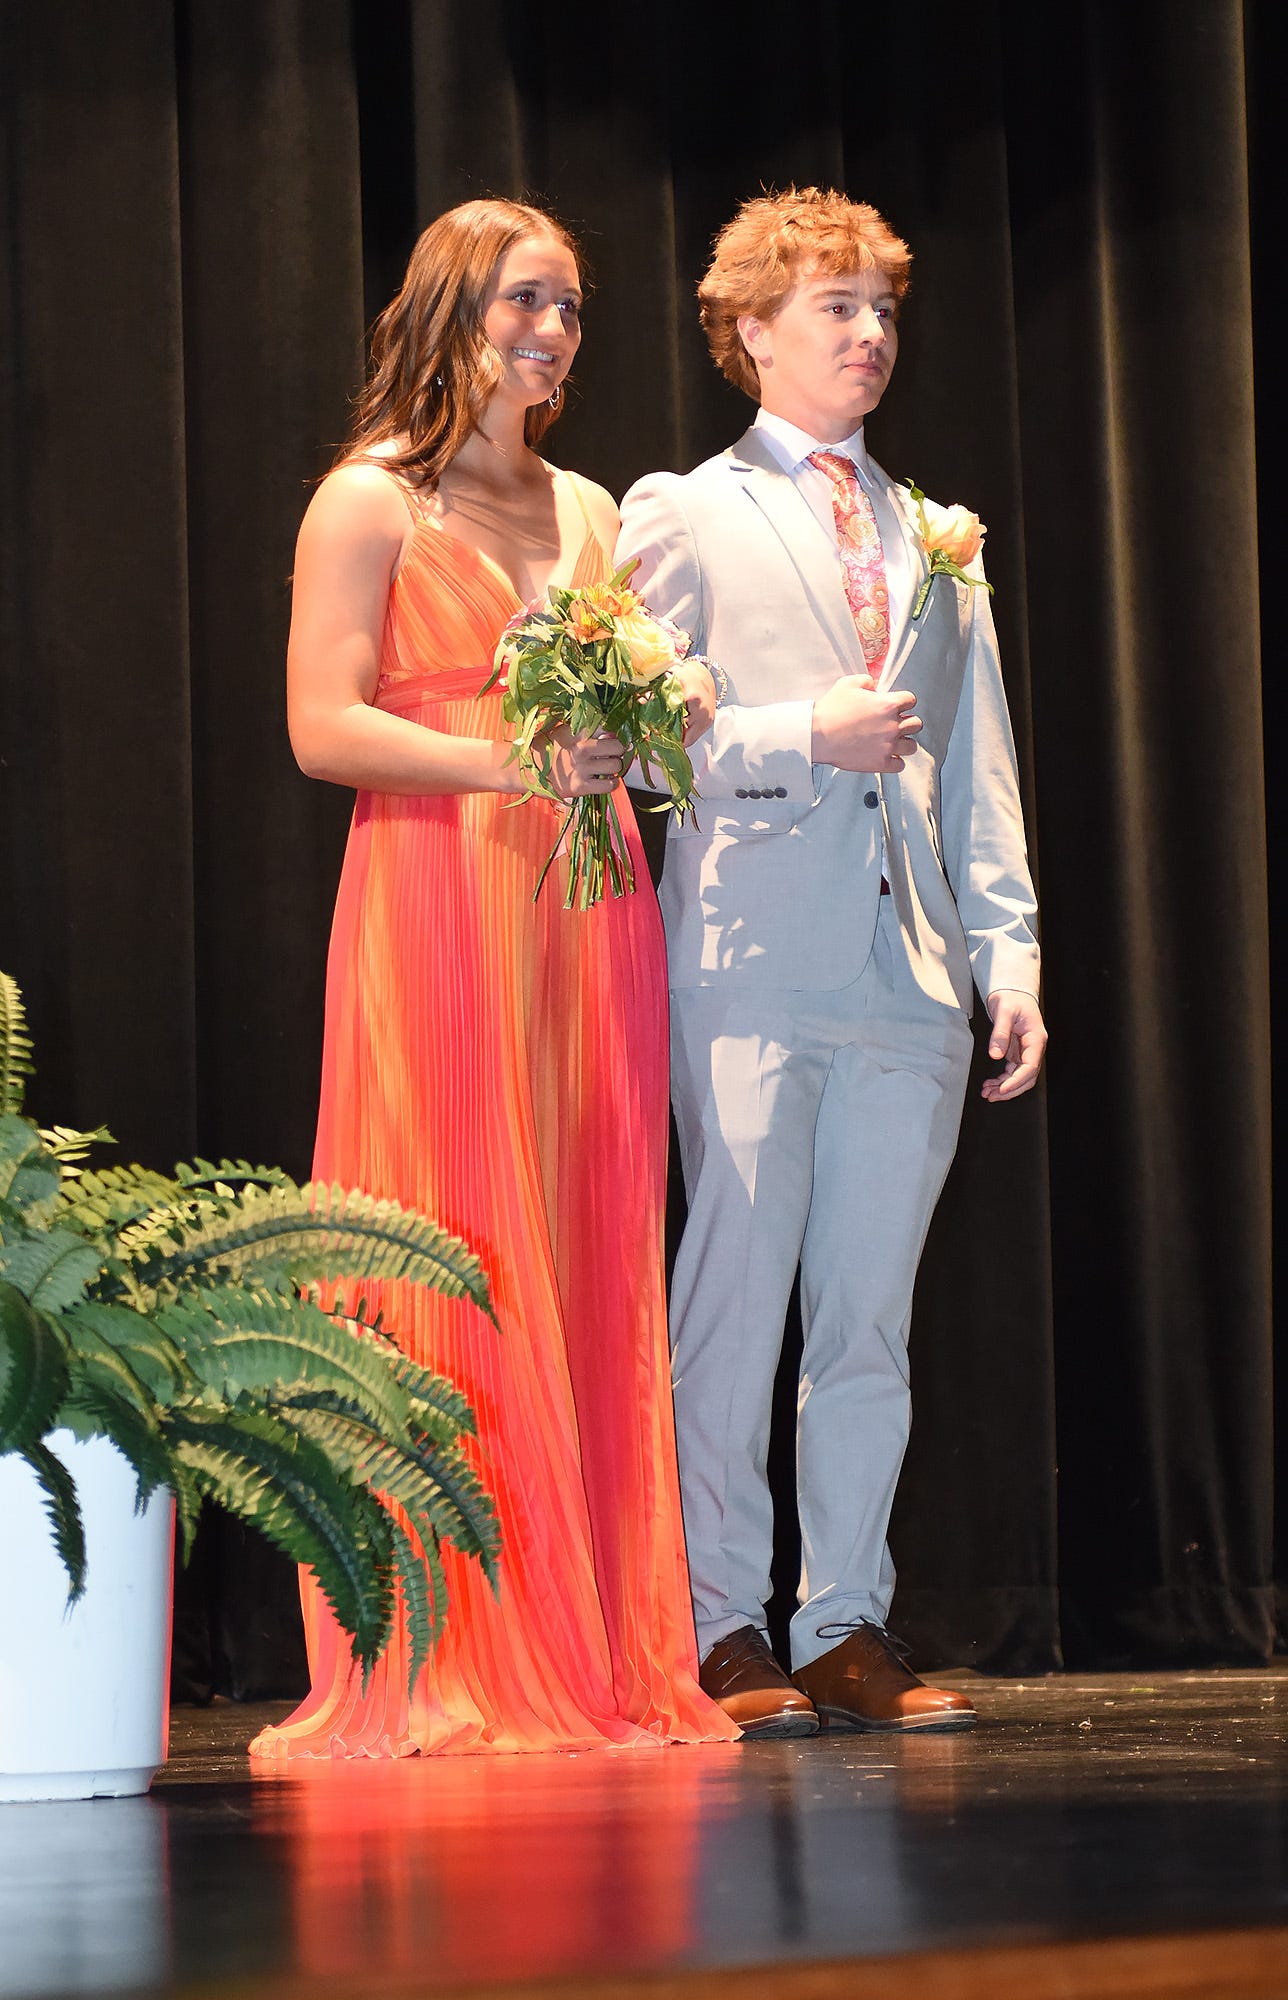 Laurel High School moved its Grand Prom March inside to the High School Auditorium after the rain came into the area on Saturday, April 27, in Laurel.